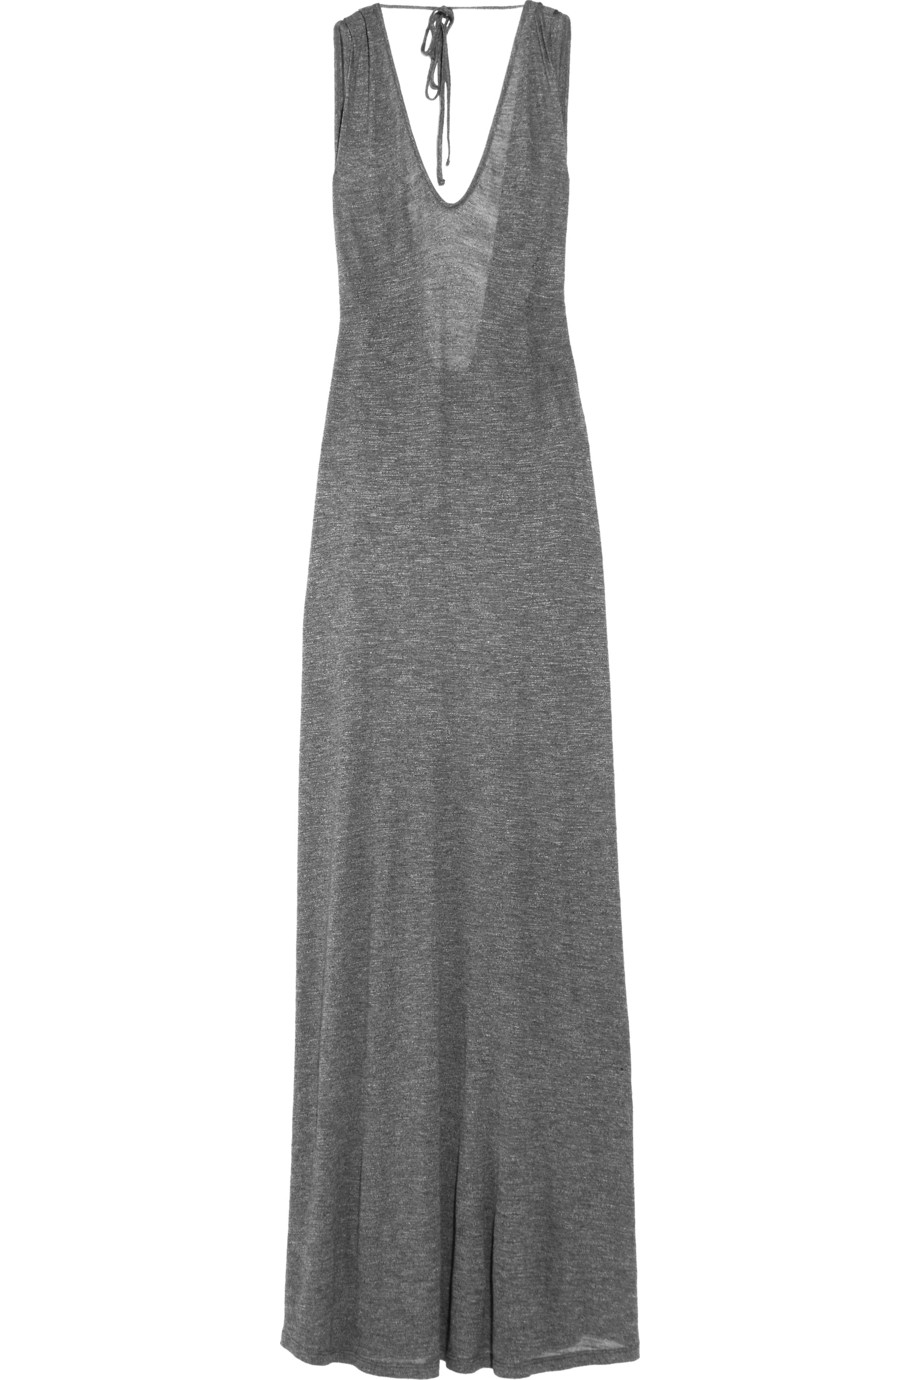 Lyst - Elizabeth And James Molly Dress in Gray